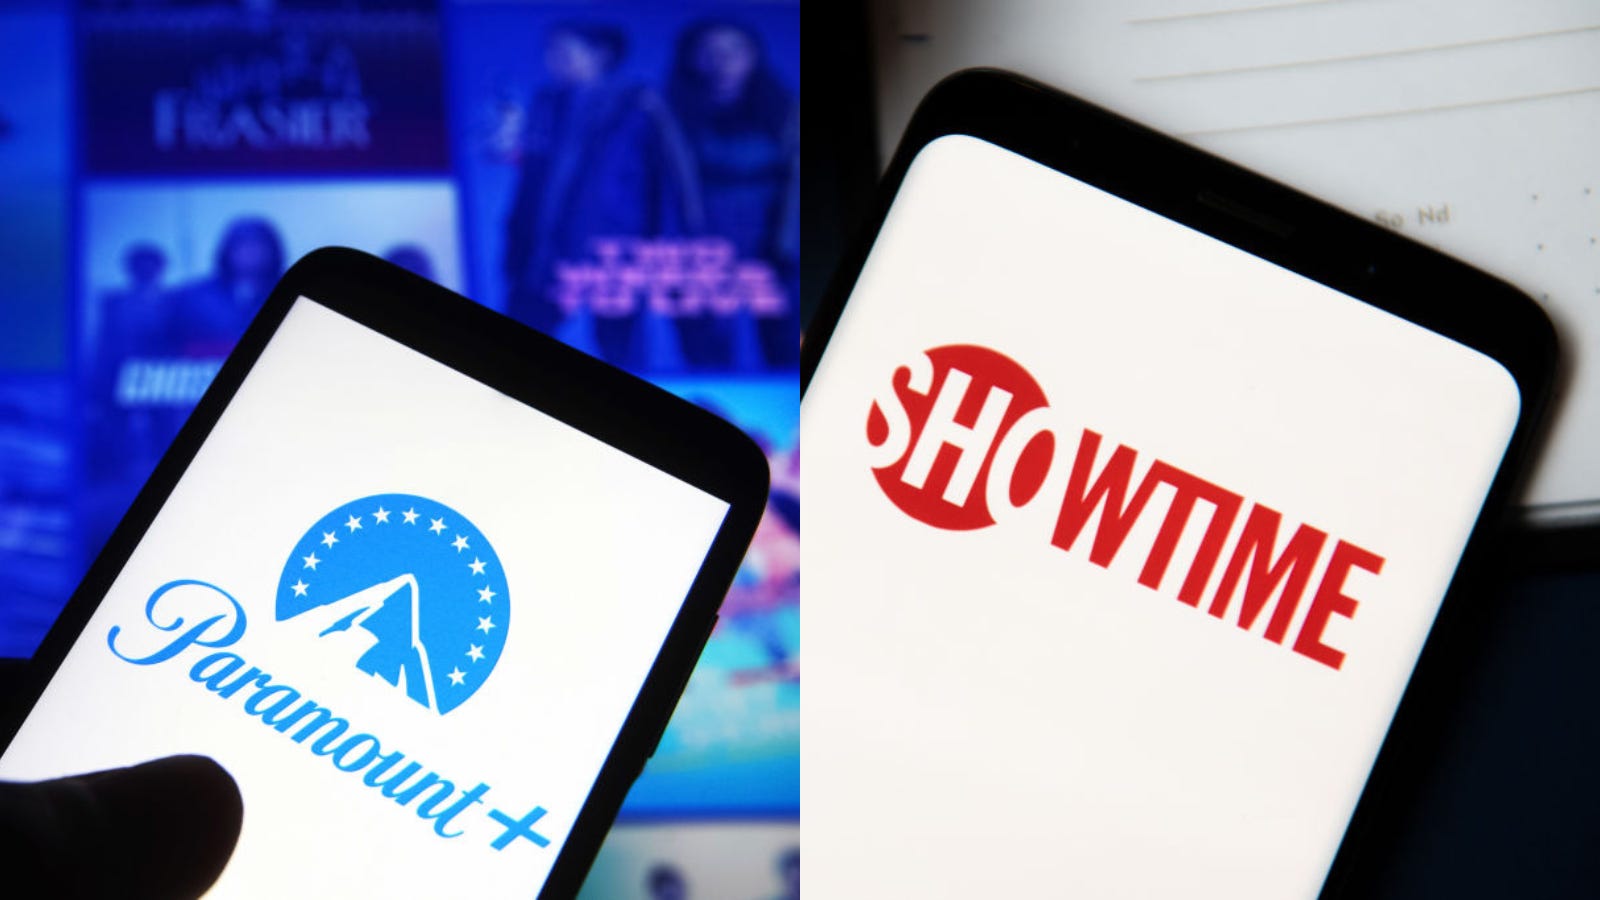 Paramount Plus & Showtime Bundle Get 2 Streaming Services For The